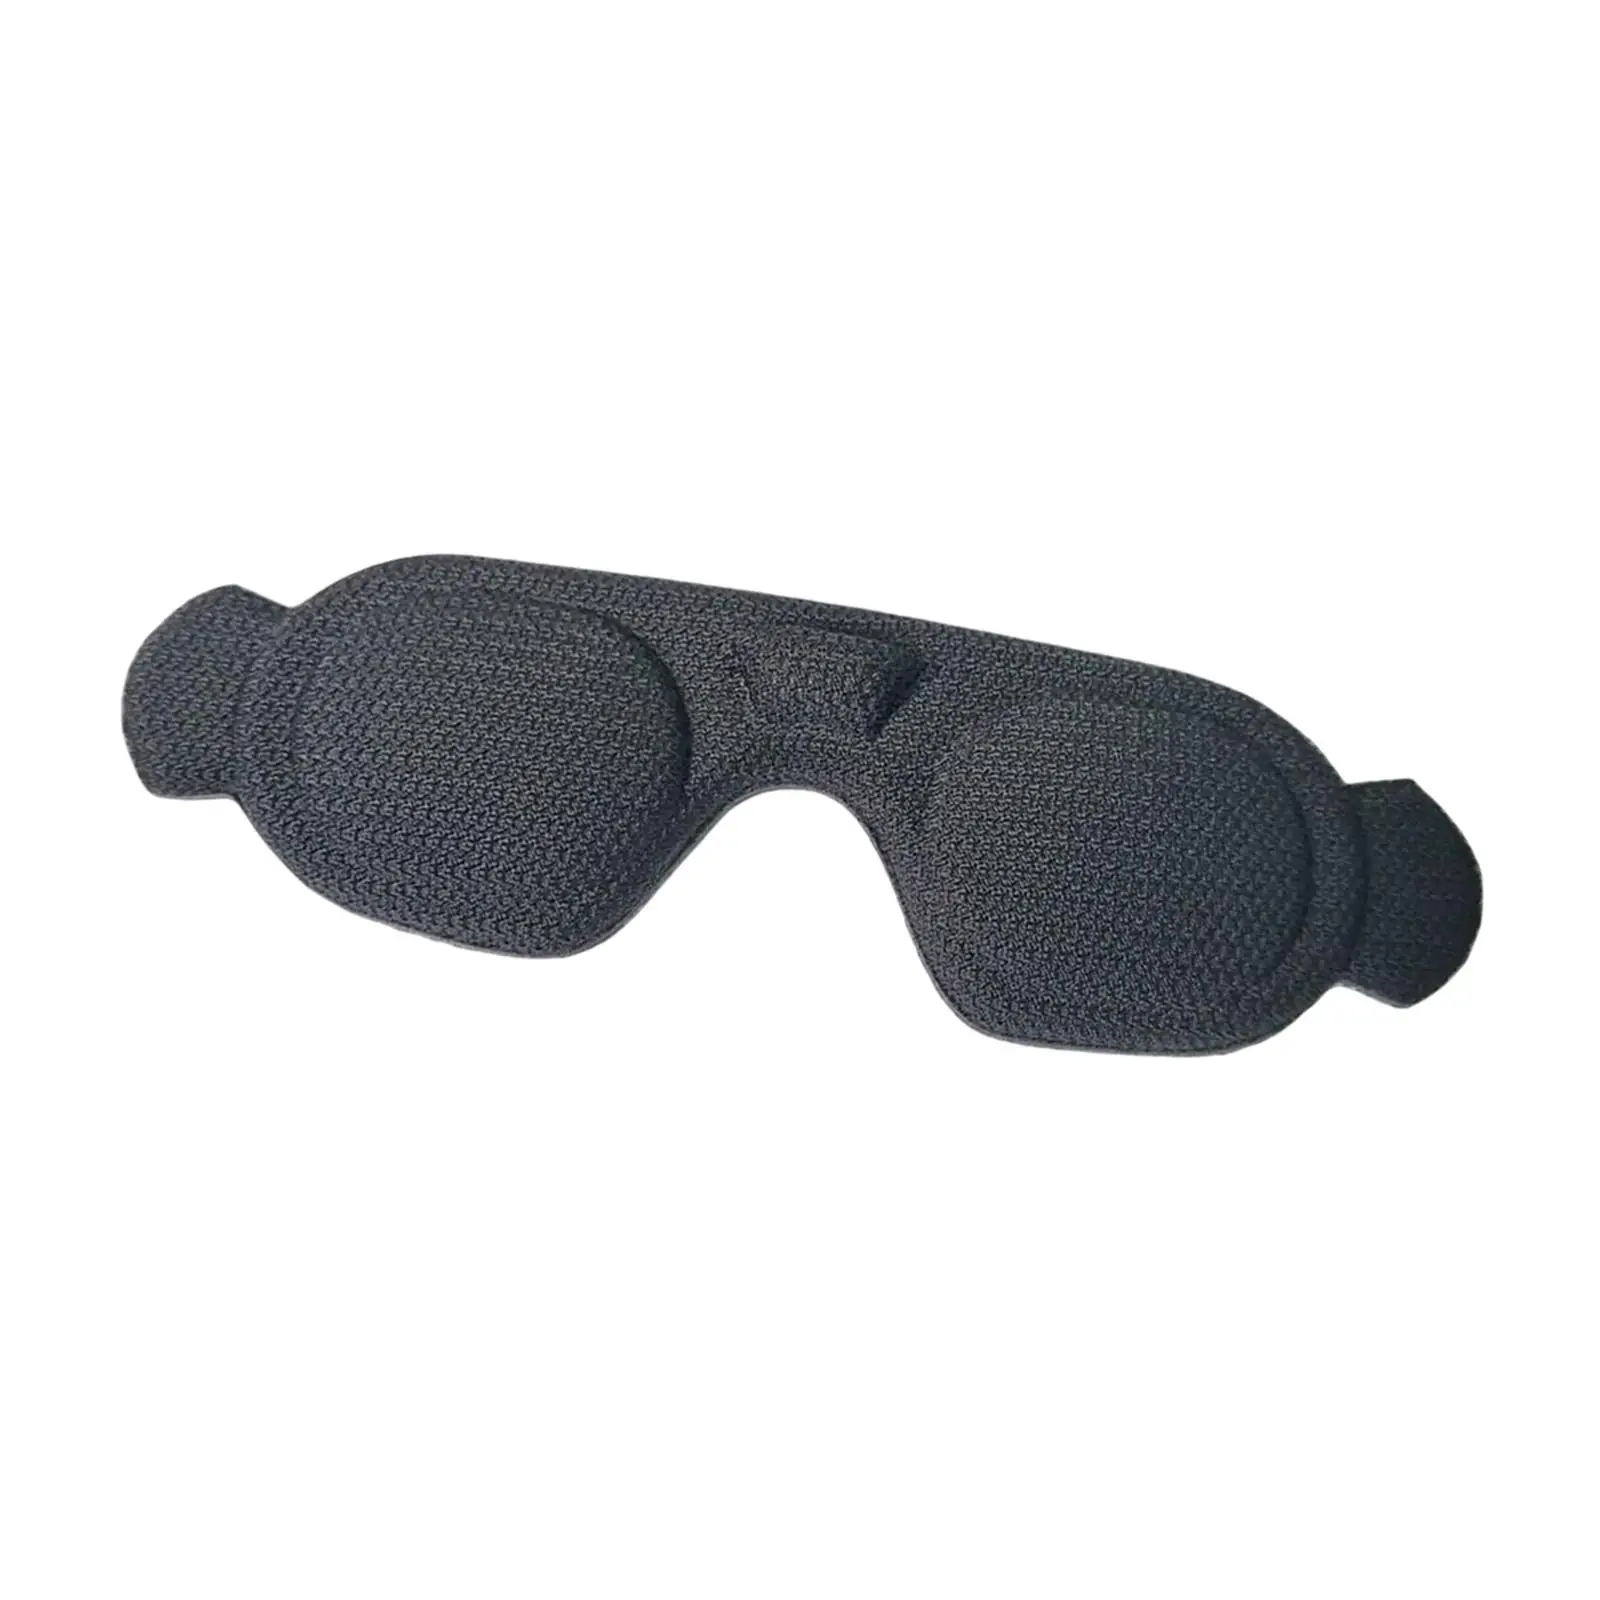 Lens Protector Lightproof Prevent Sunshine Light Dustproof Lens Protective Cover Sunshade Pad for Goggles Integra / 2 Accessory